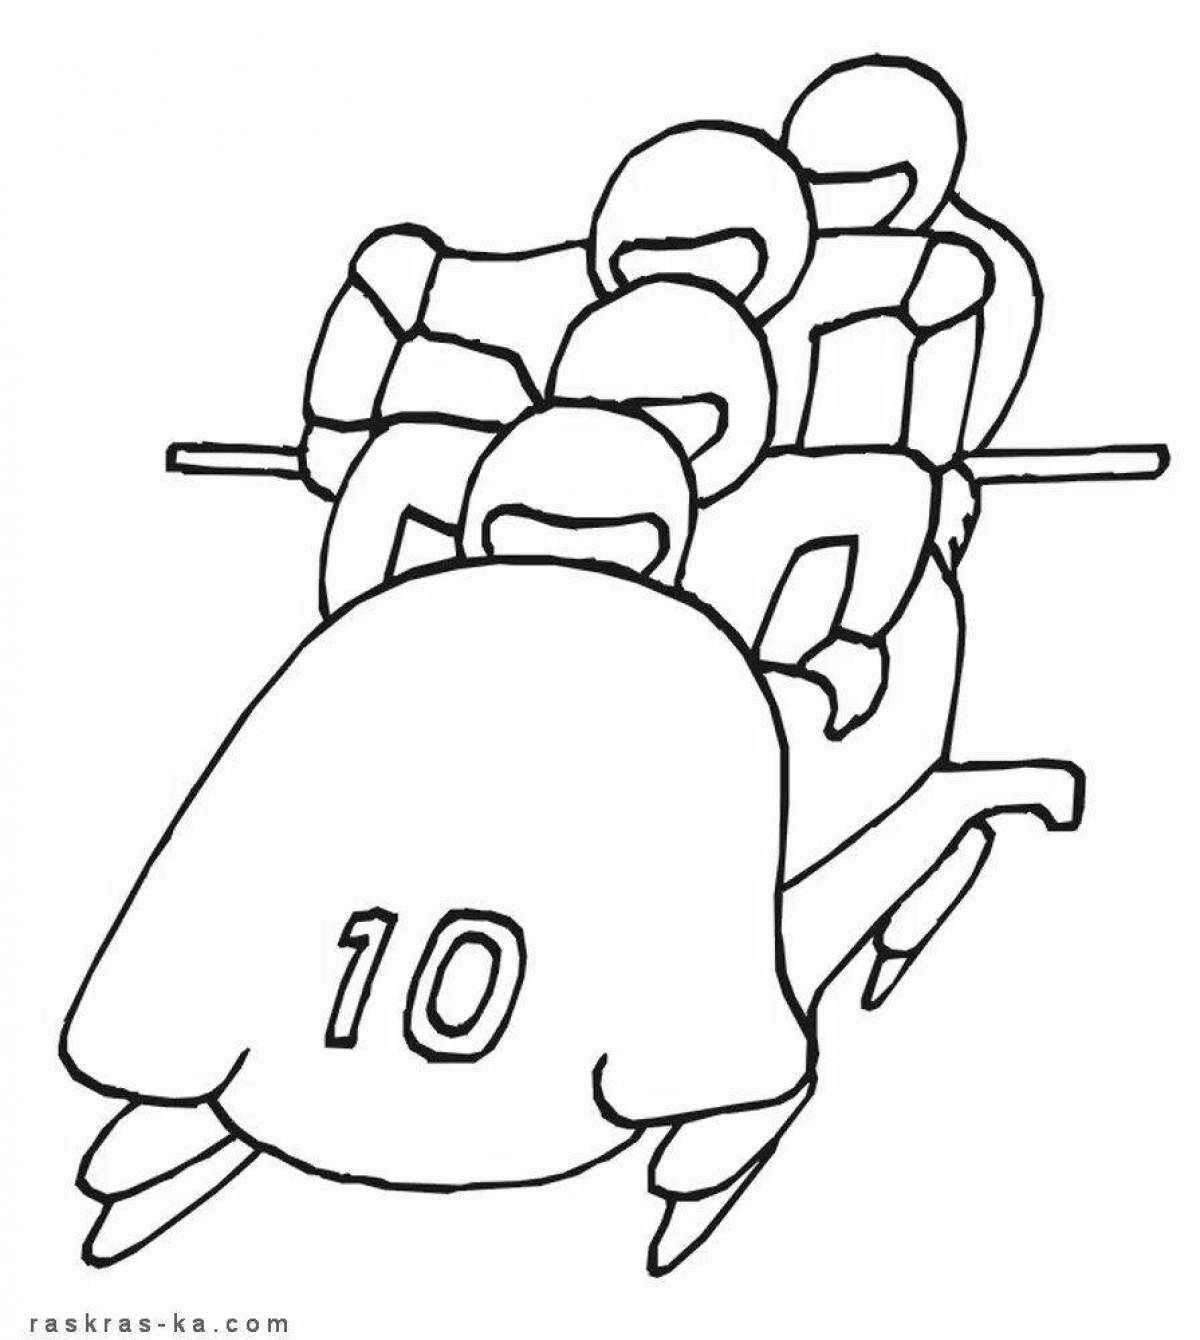 Bright sleigh coloring page